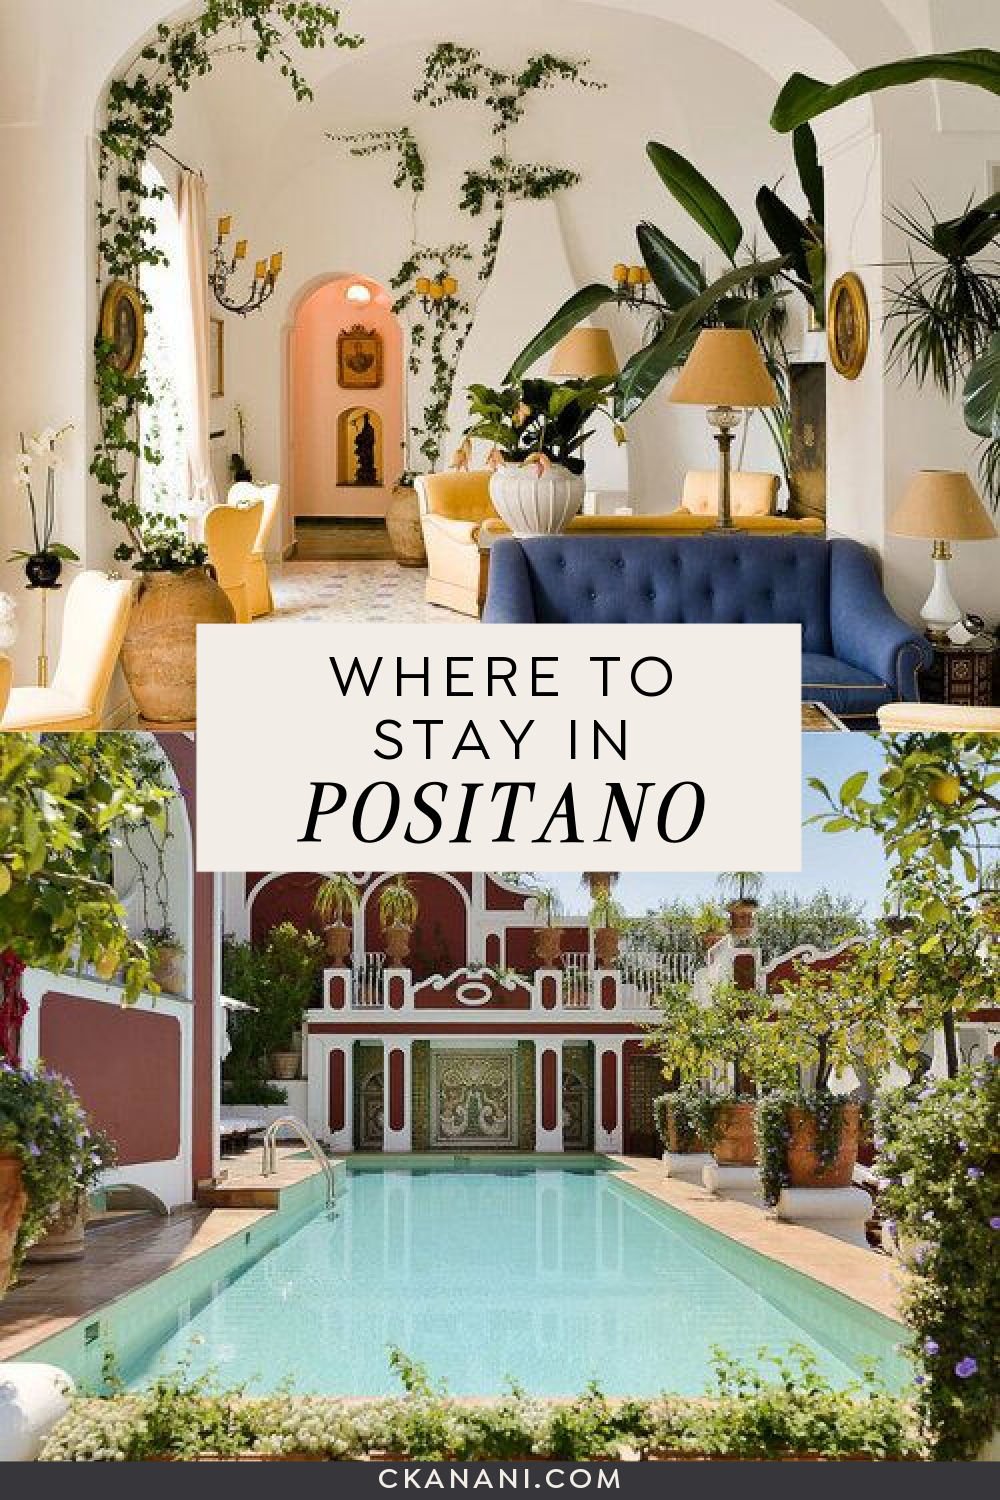 Wondering where to stay in Positano? Here are the best options including luxury hotels, hotels with pool, the best views, restaurants, and more! Positano travel tips, Positano vacation, Positano guide